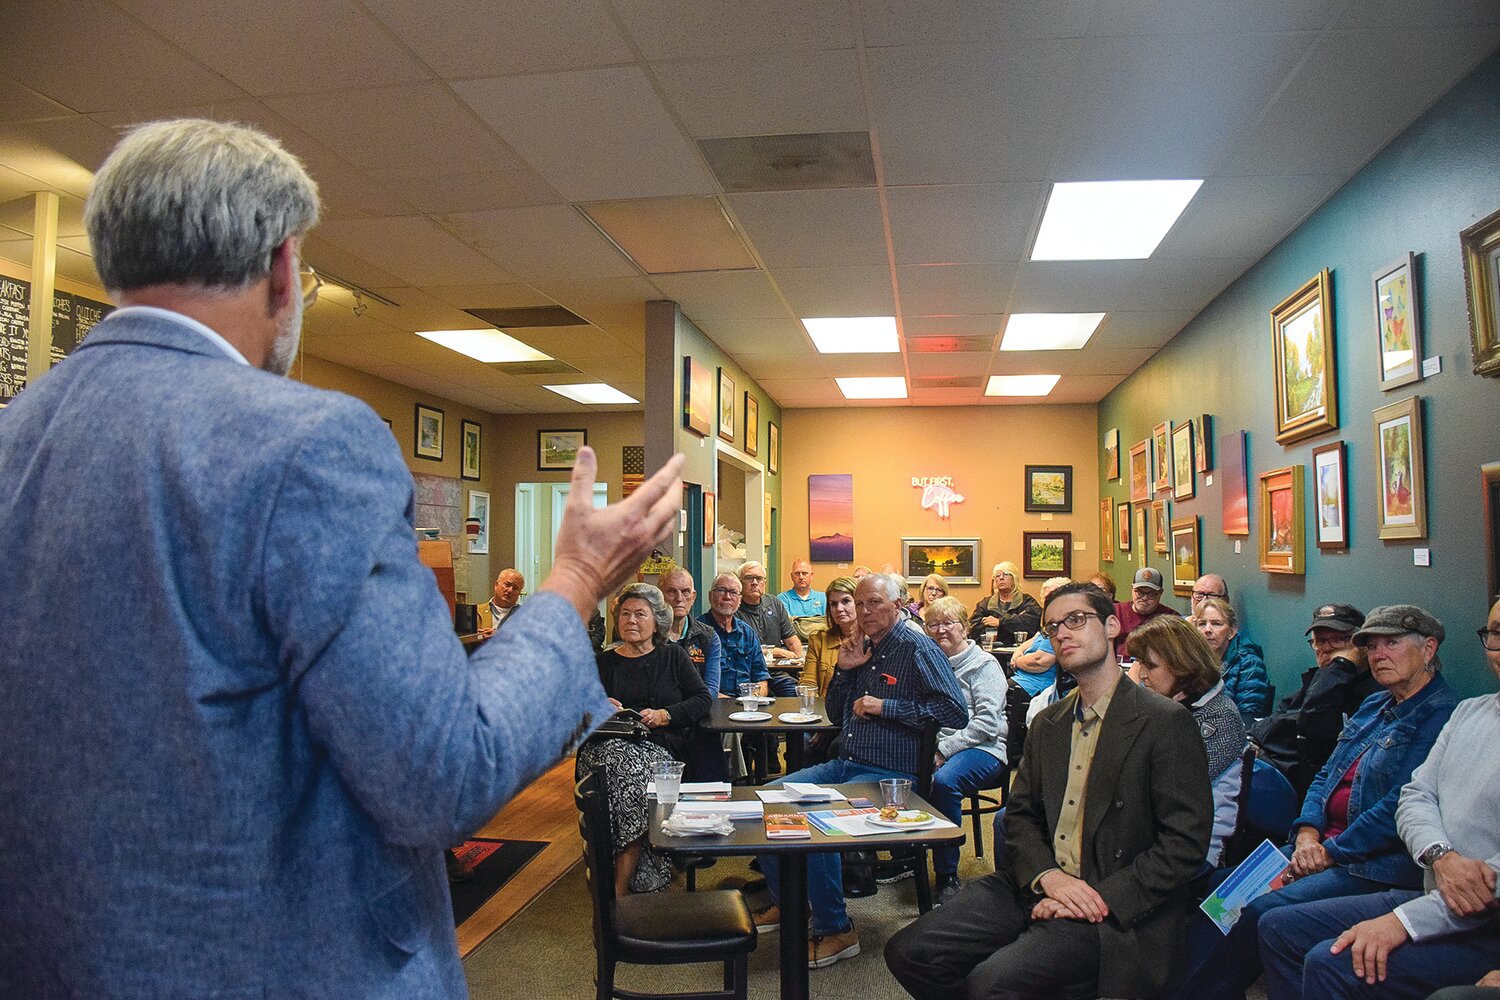 Washington State Rep. Ed Orcutt, R-Kalama, addresses an audience during a 20th Legislative District meet-and-greet event Monday, Oct. 9 at Luckman Coffee in Woodland.